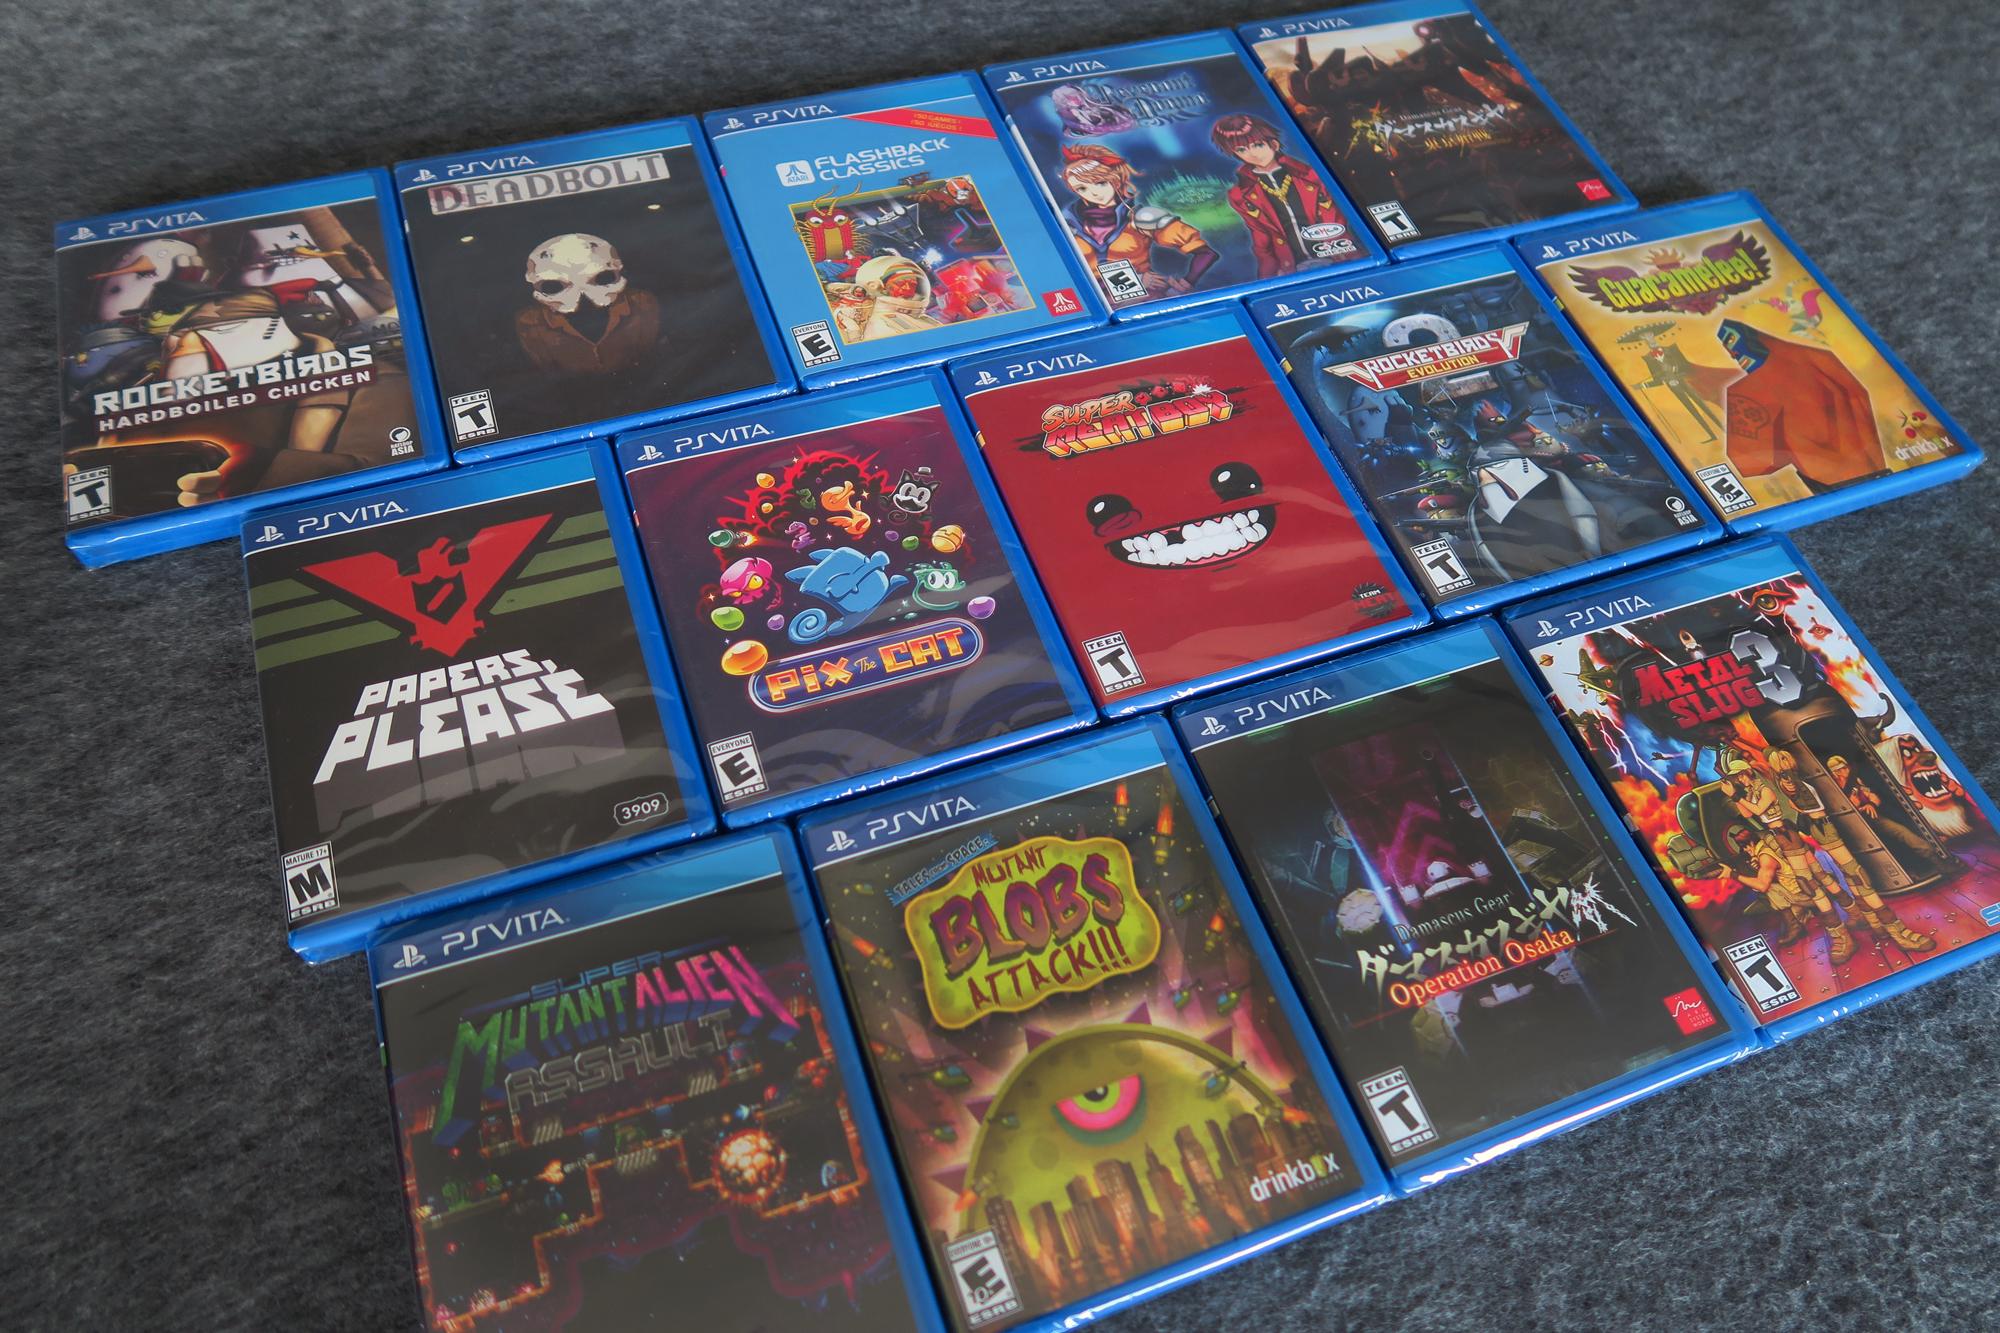 Limited Run Games added a new photo. - Limited Run Games